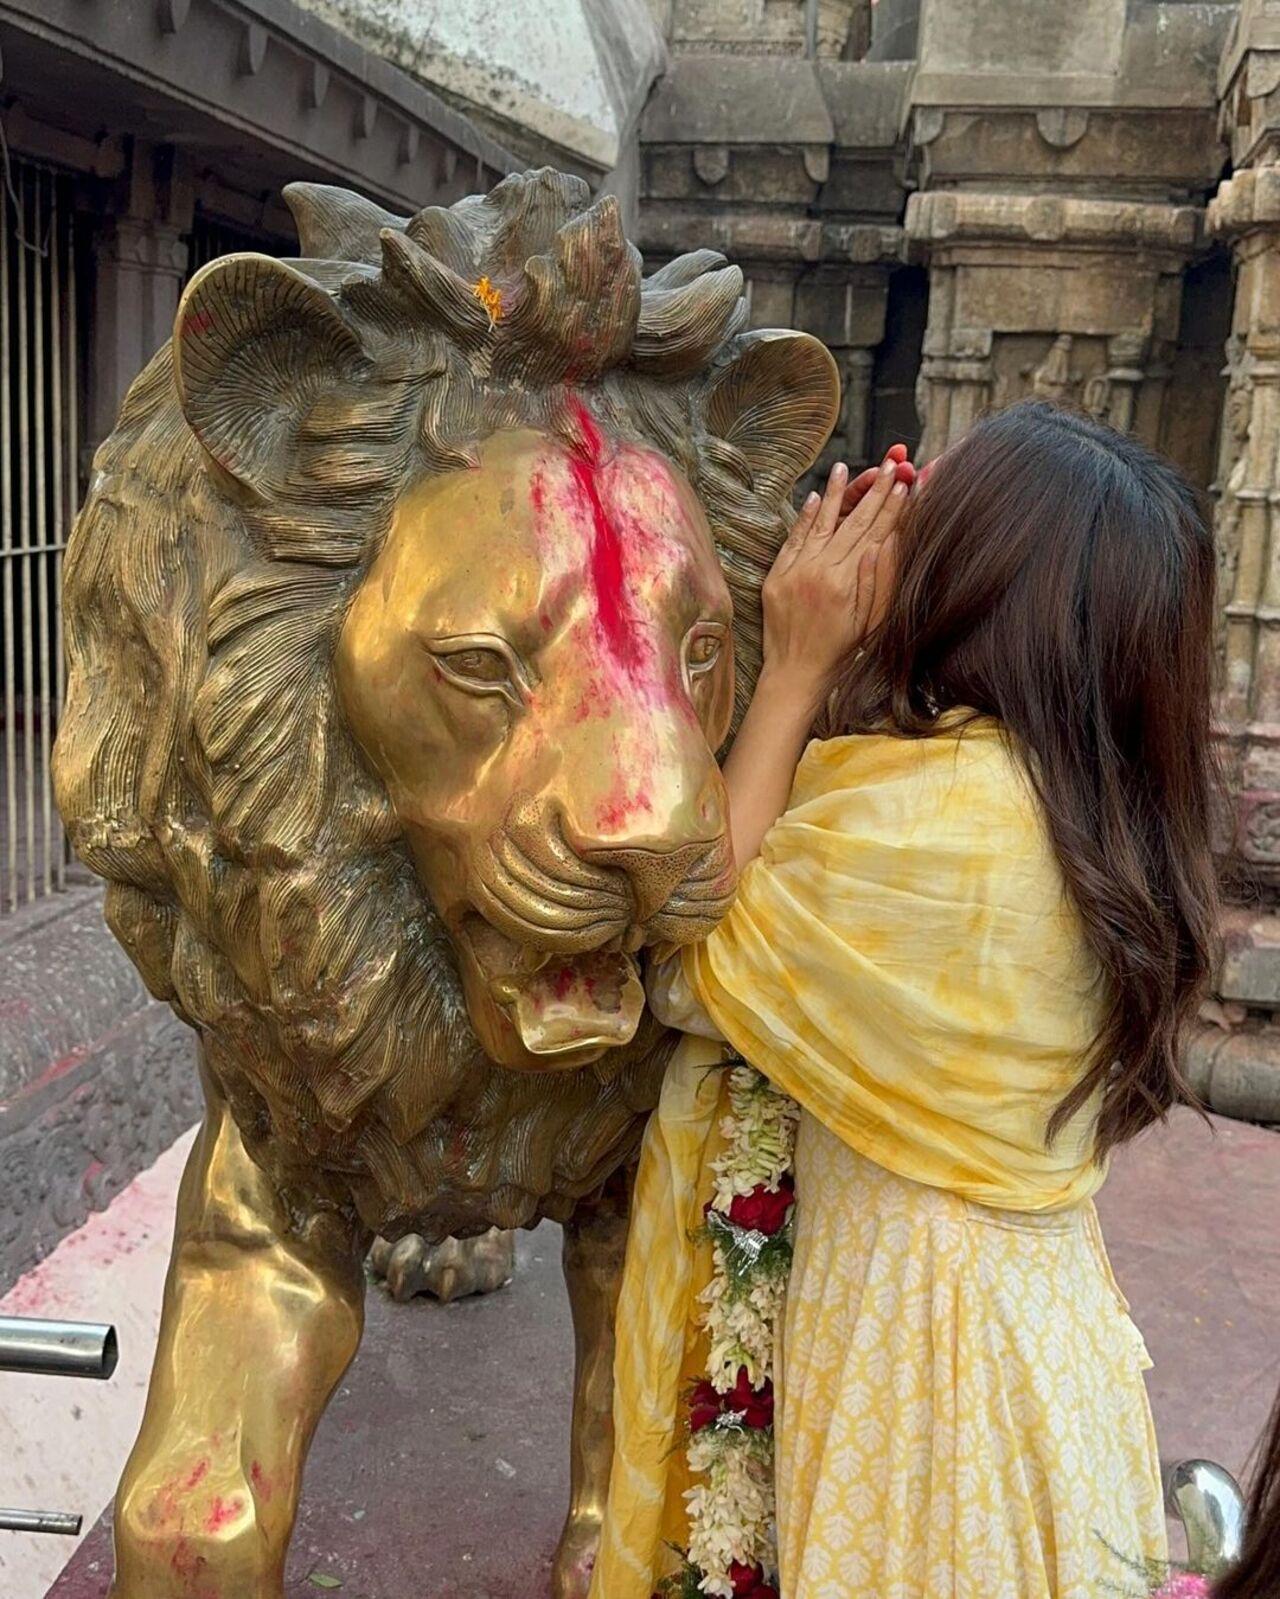 Bhumi Pednekar whispers in the ear of a lion idol. It is said that wishes whispered in the ear of the lion is fulfilled by the Goddess